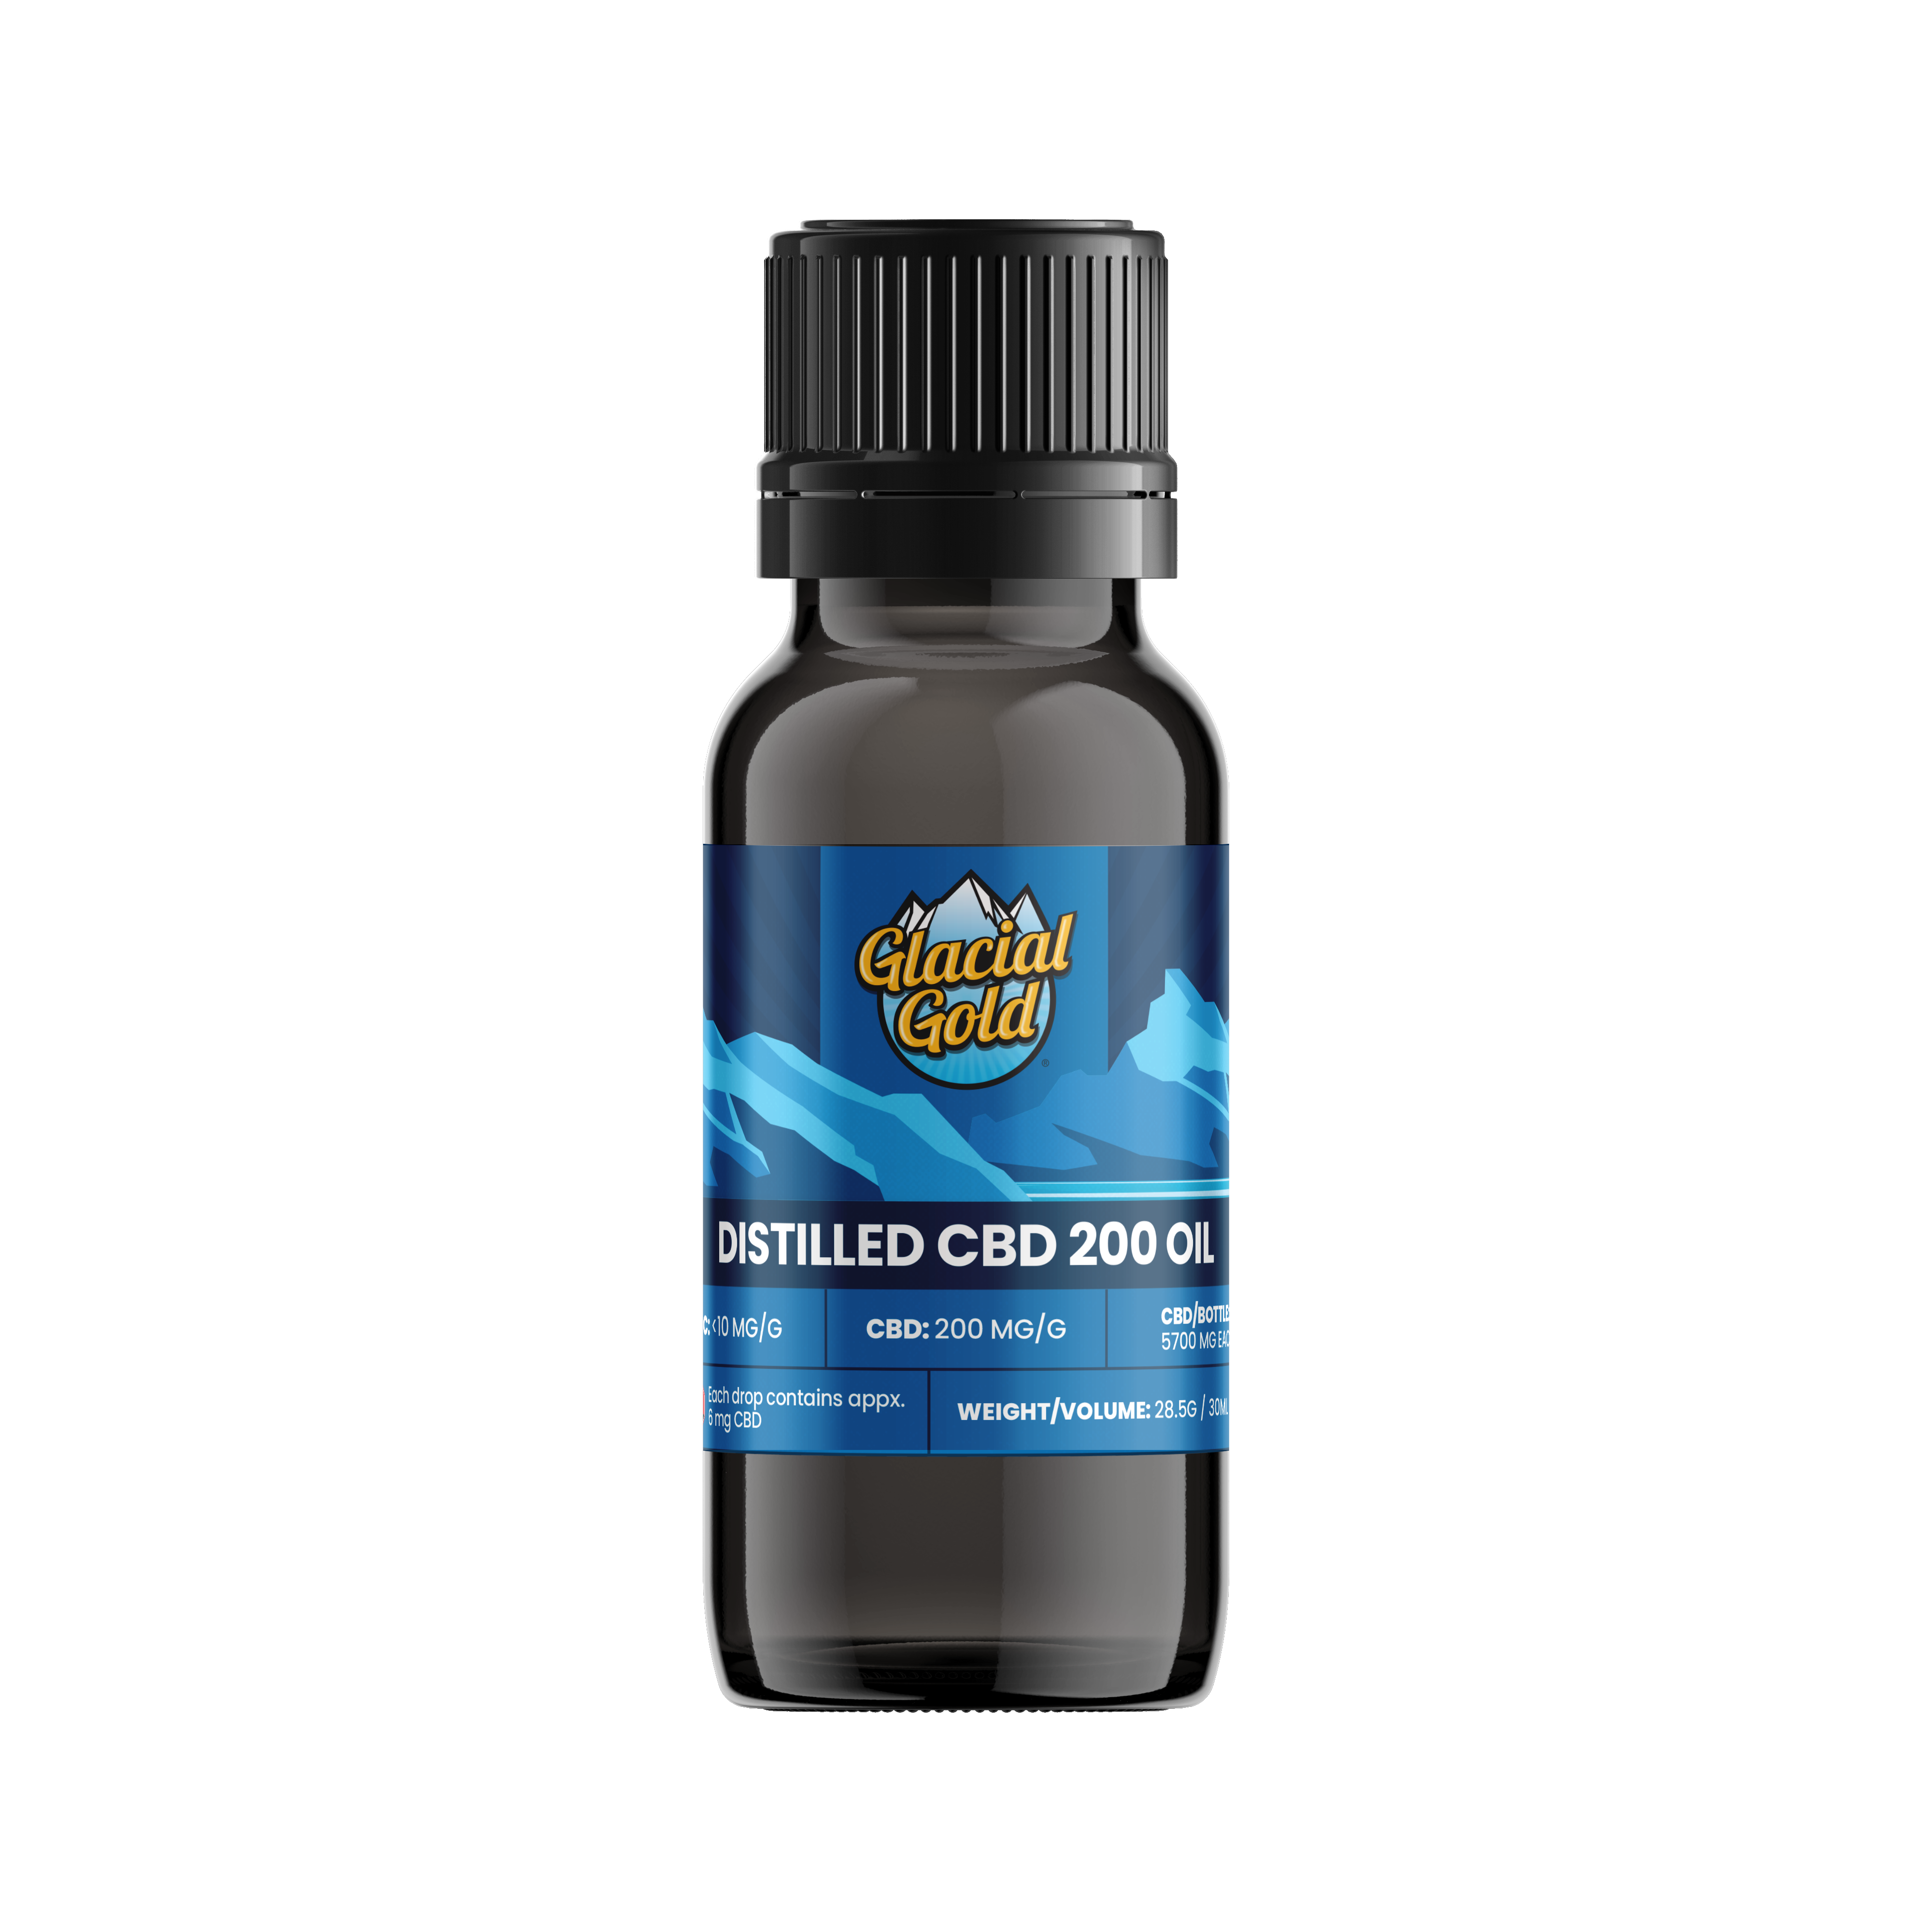 Cannabis Product Glacial Gold - Distilled CBD 200 Oil Drops by Glacial Gold